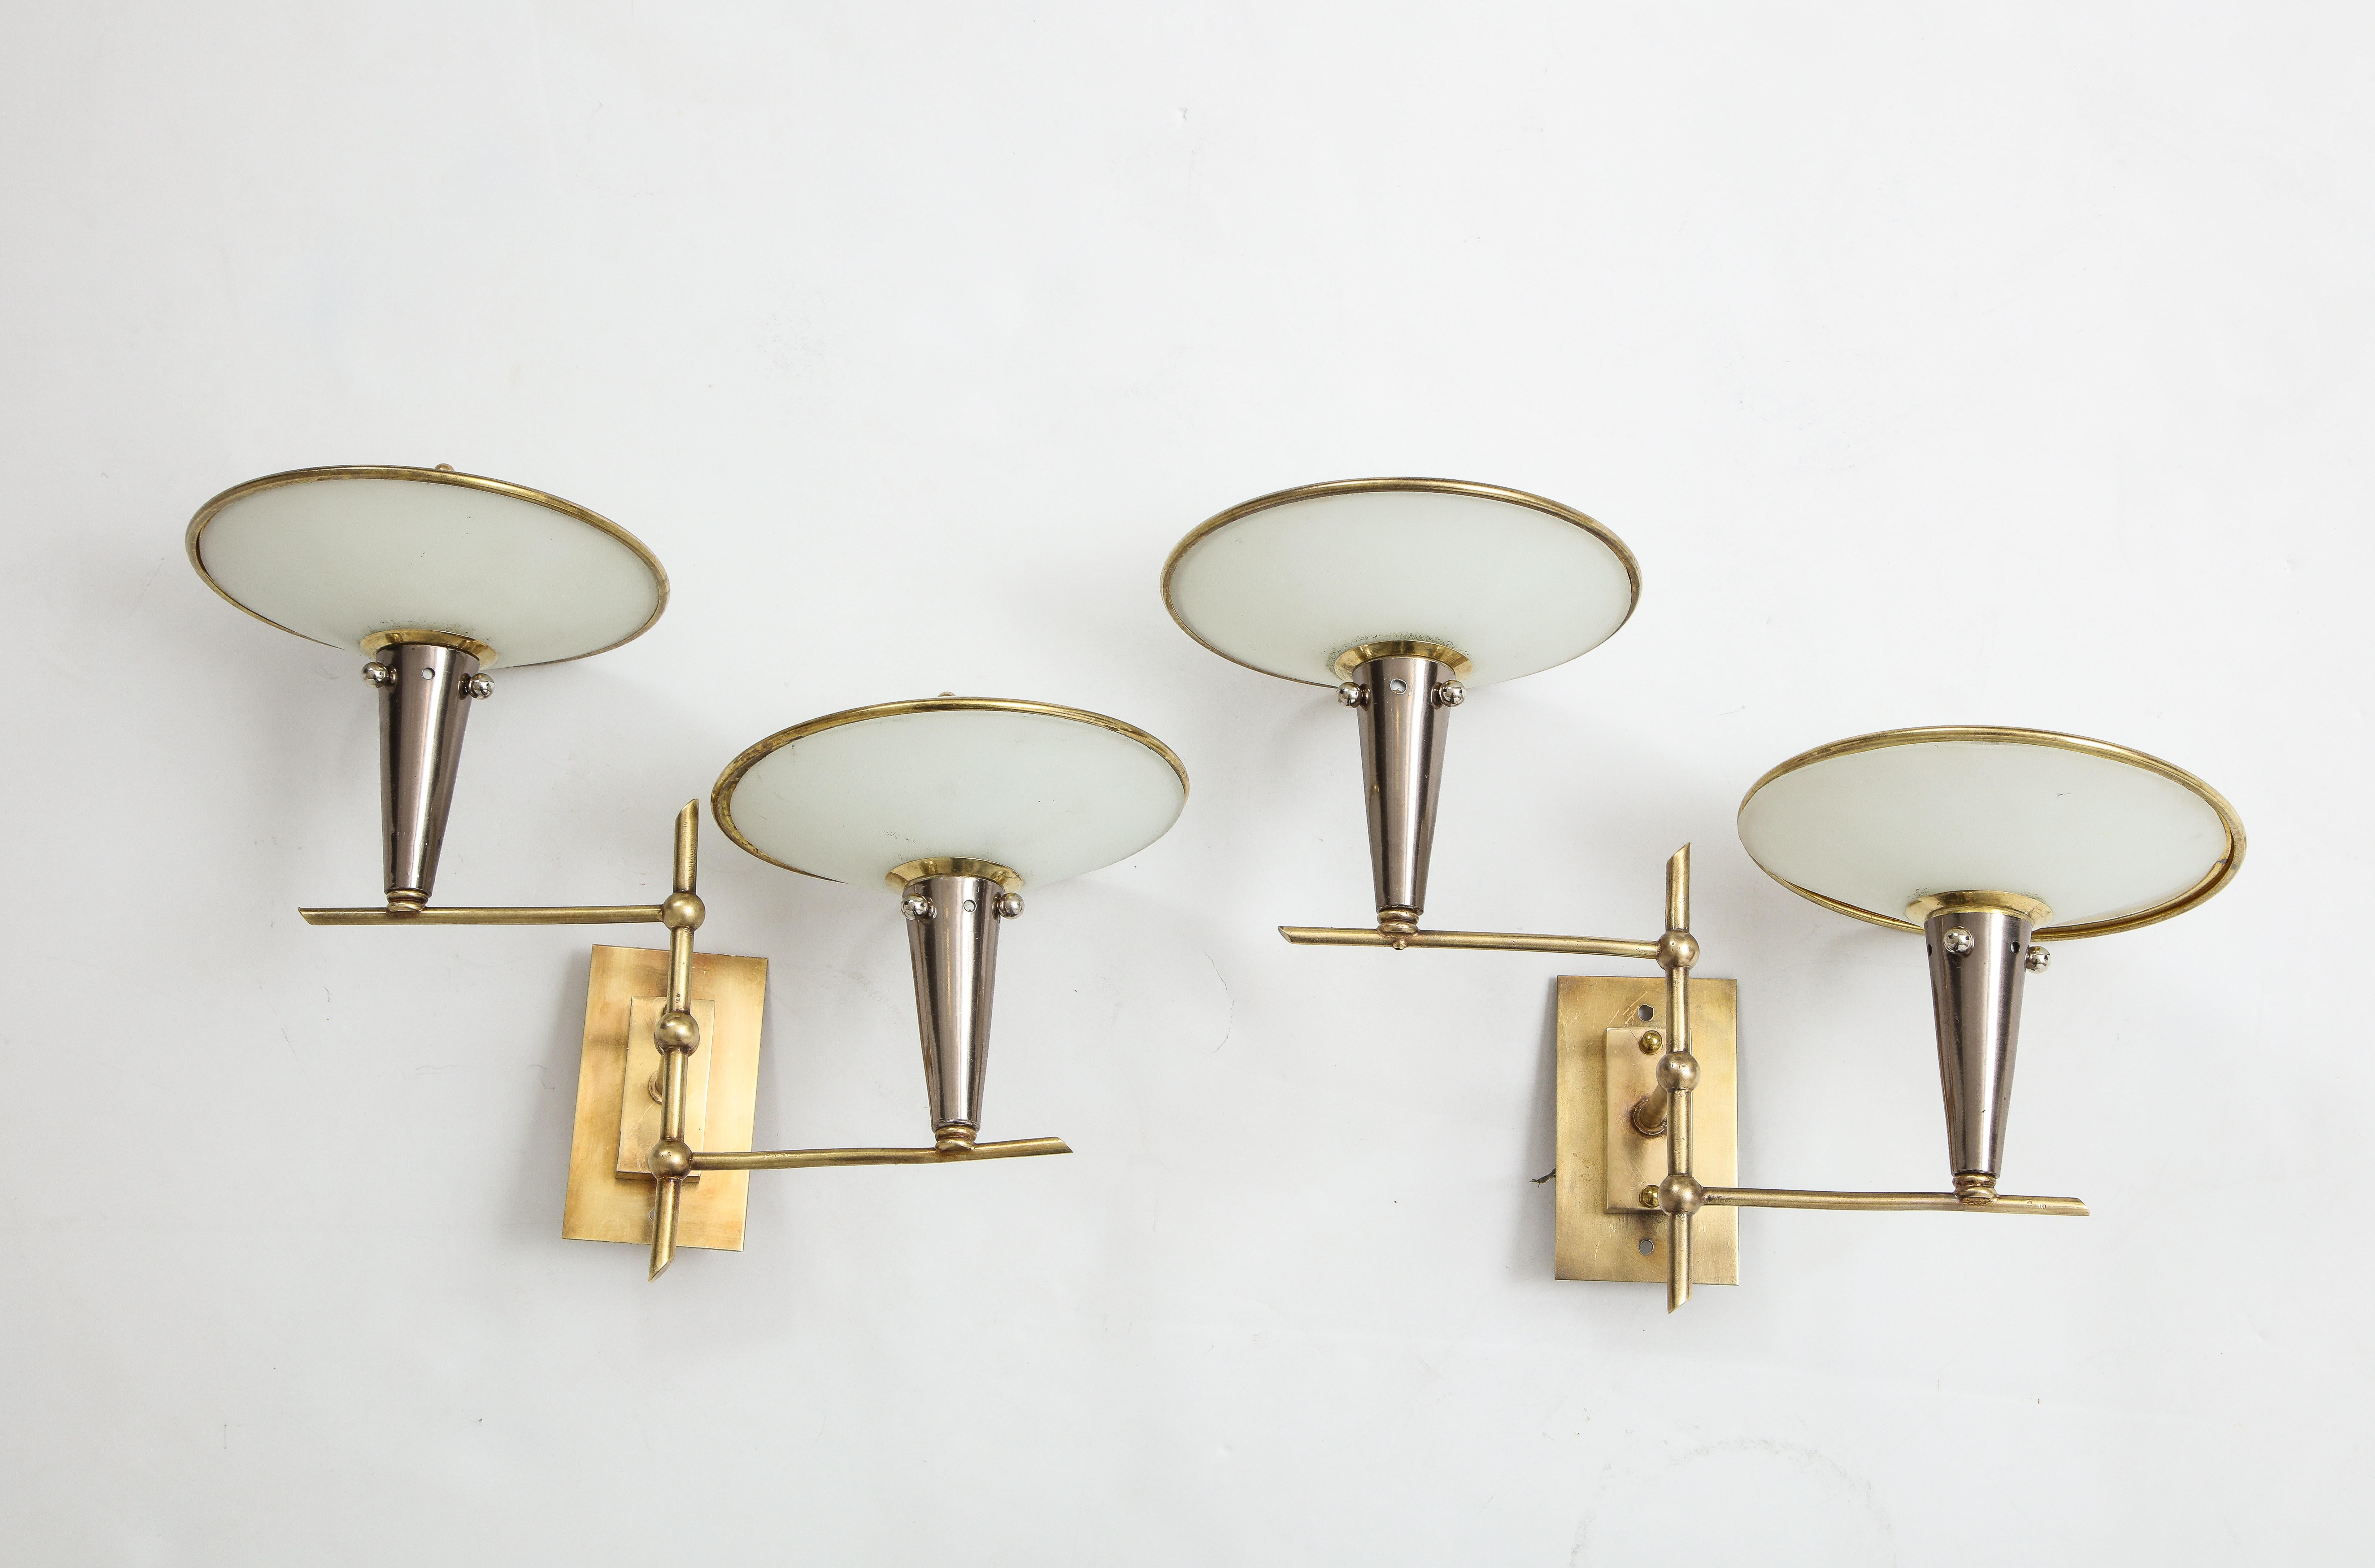 A pair of very unusual and interesting Italian 1950's wall lights. The brass wall plates attach to a vertical brass stem from which two brass arms extend; with conical shaped nickel supports at either end, below spherical shaped opaline glass shades